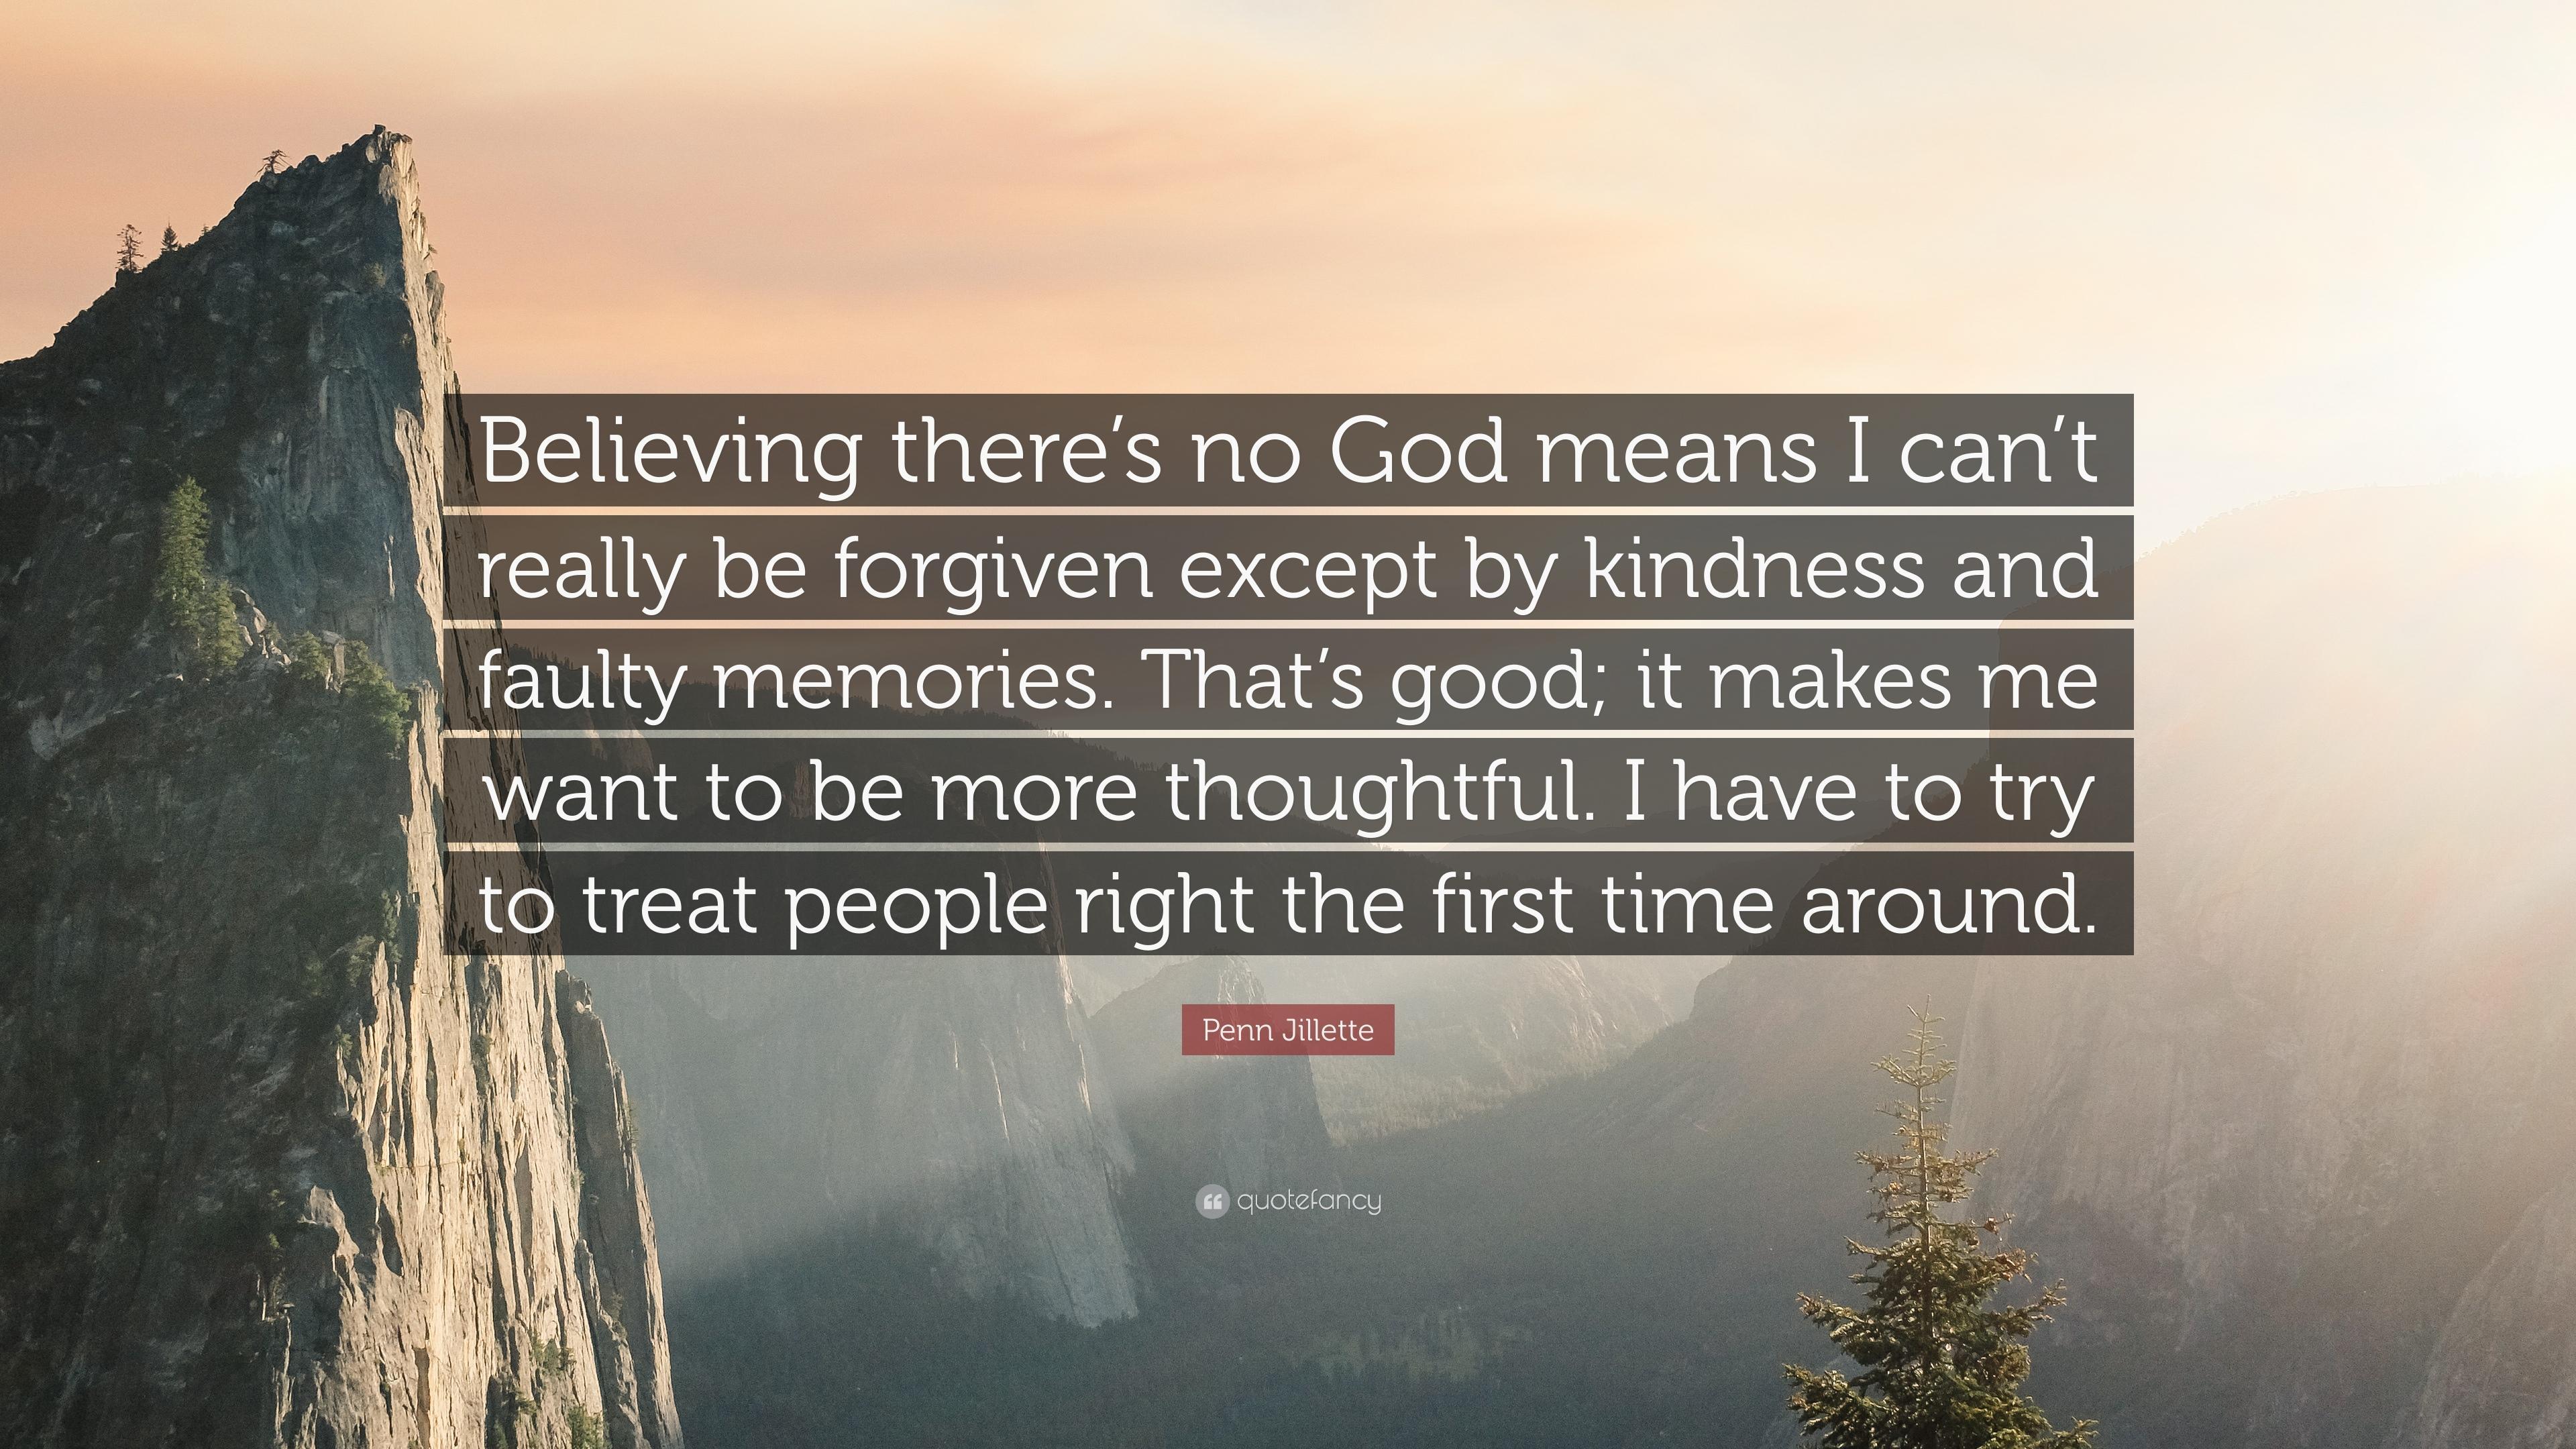 Penn Jillette Quote: “Believing there's no God means I can't really